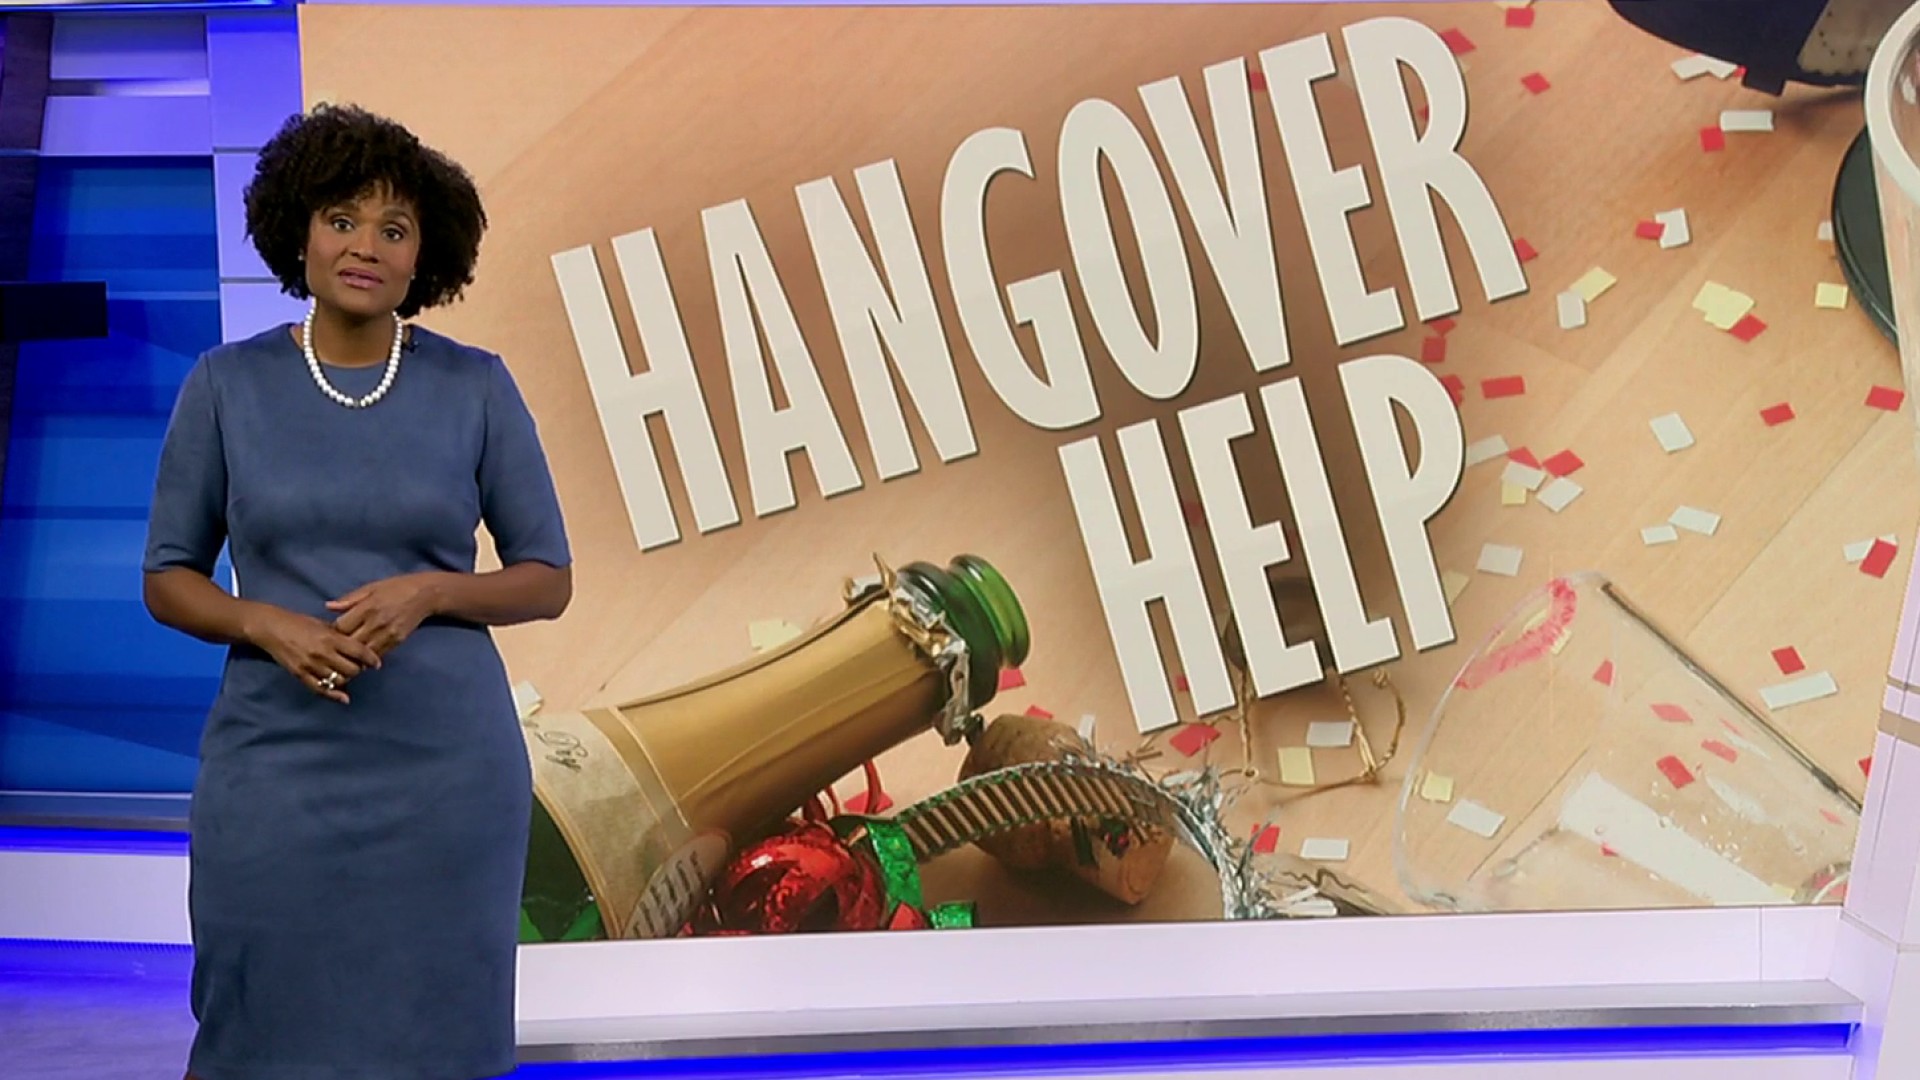 Expert explains why pharmacist's viral 'hangover cure' really works